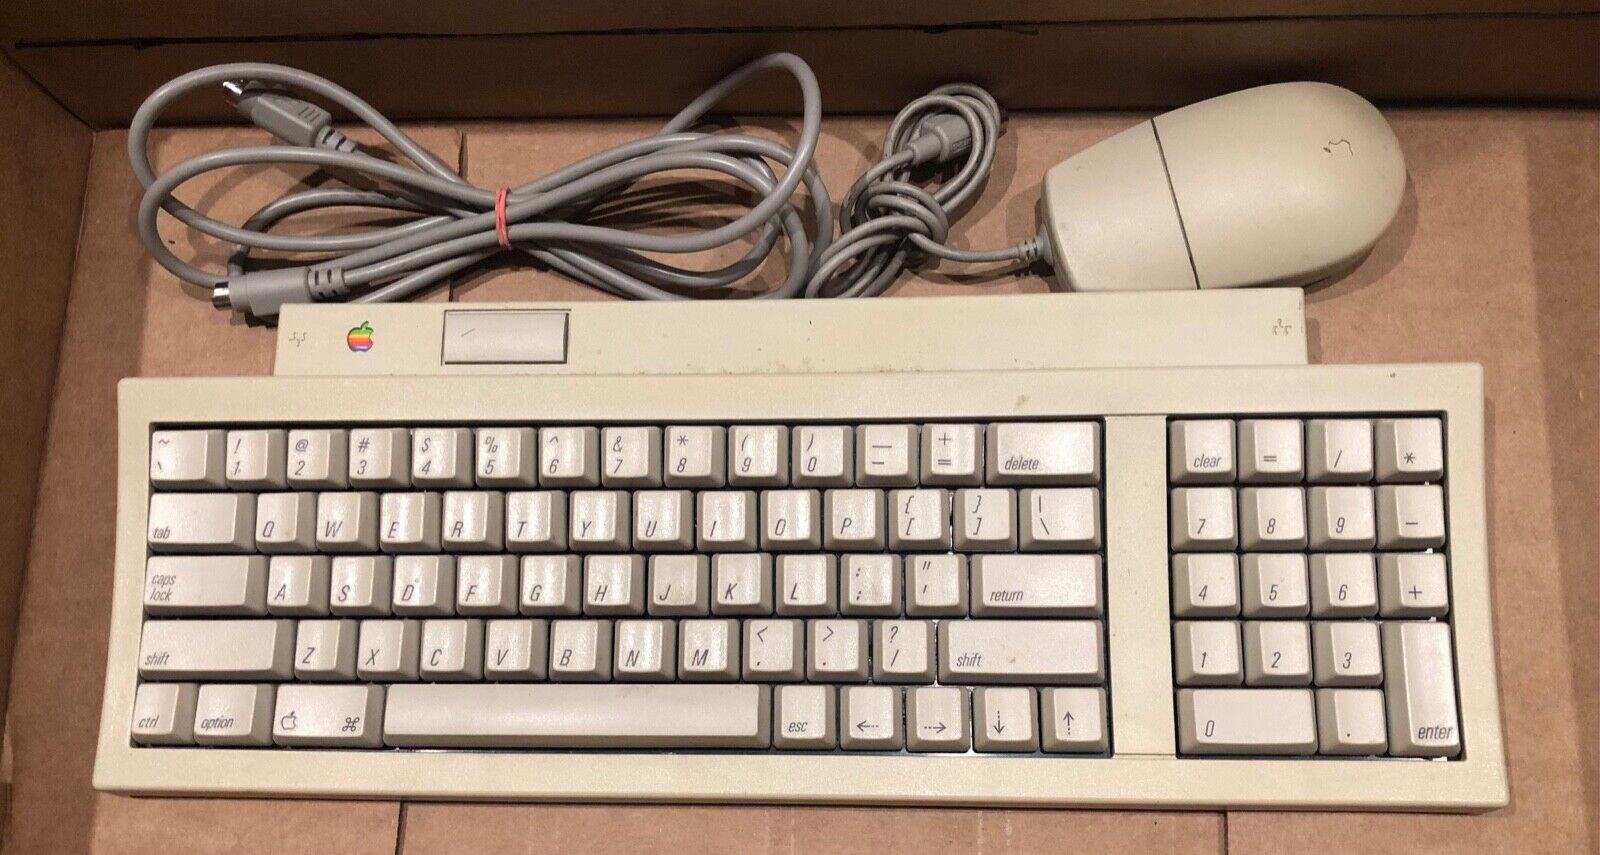 Apple Vintage M4087 Keyboard II with ADB Cable and Mouse Tested/Working (5/23)